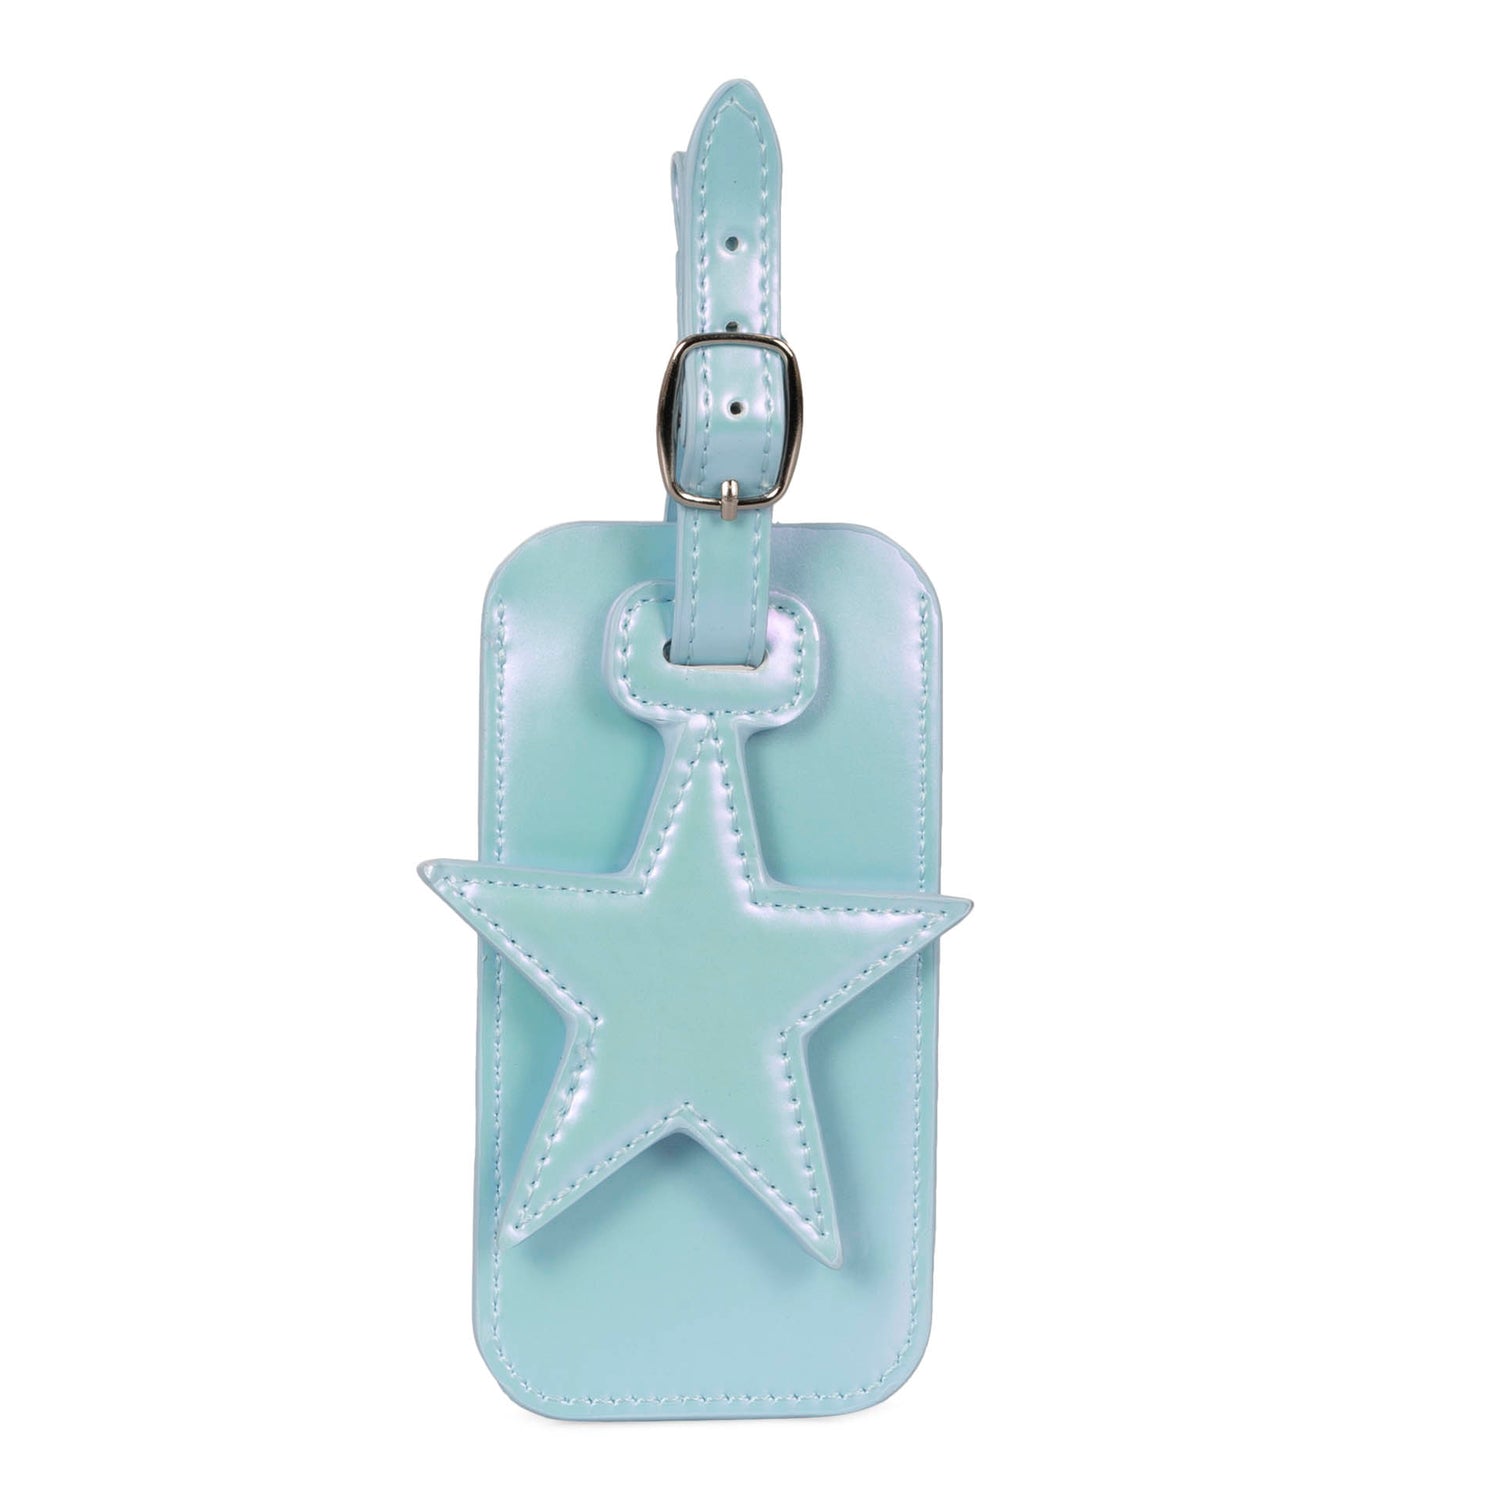 Back side of a luggage tag designed by Tracker showing its blue metallic star charm and pvc texture.